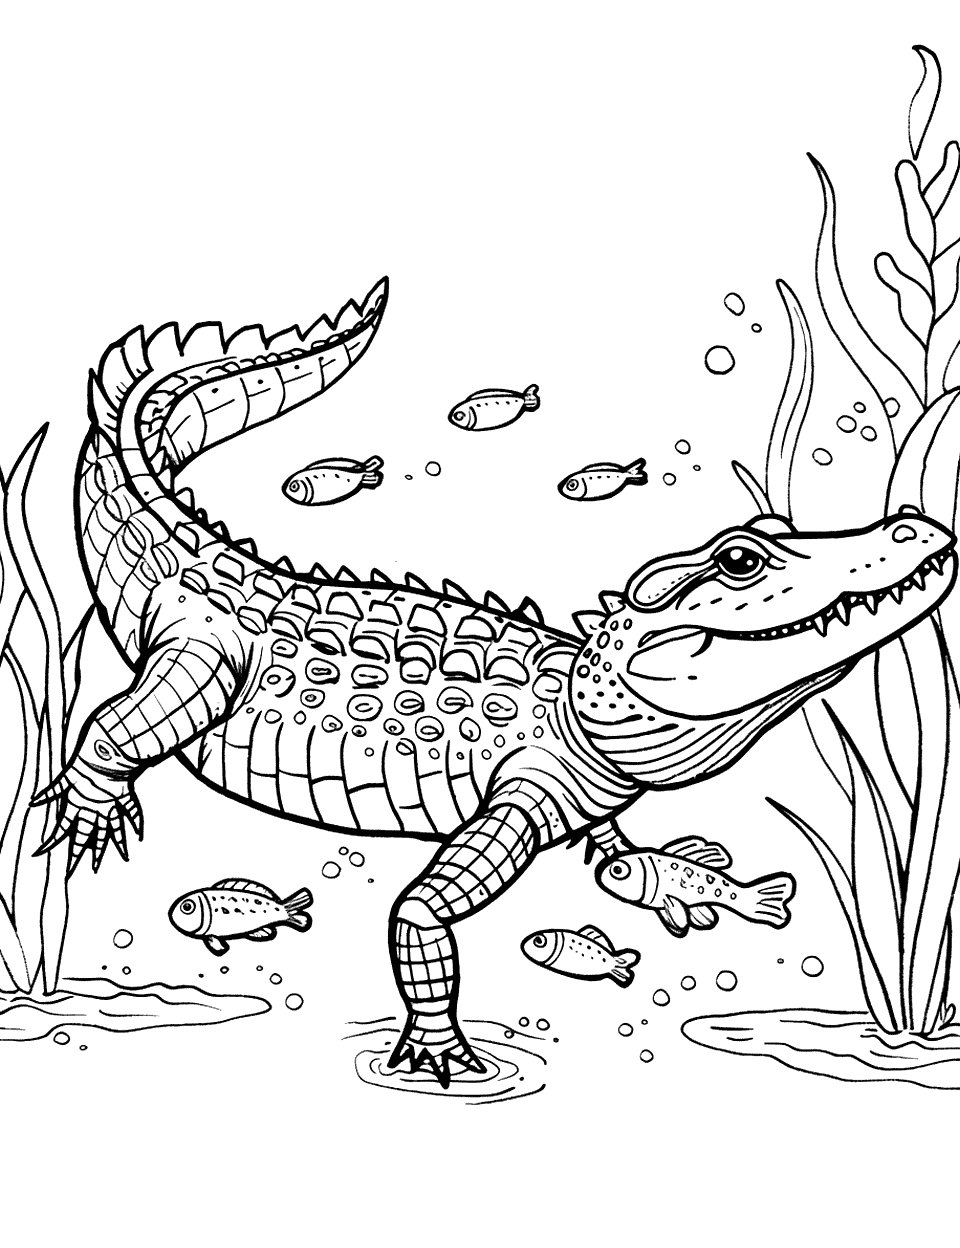 Alligator Underwater Coloring Page - An alligator swimming underwater with fish and aquatic plants around.